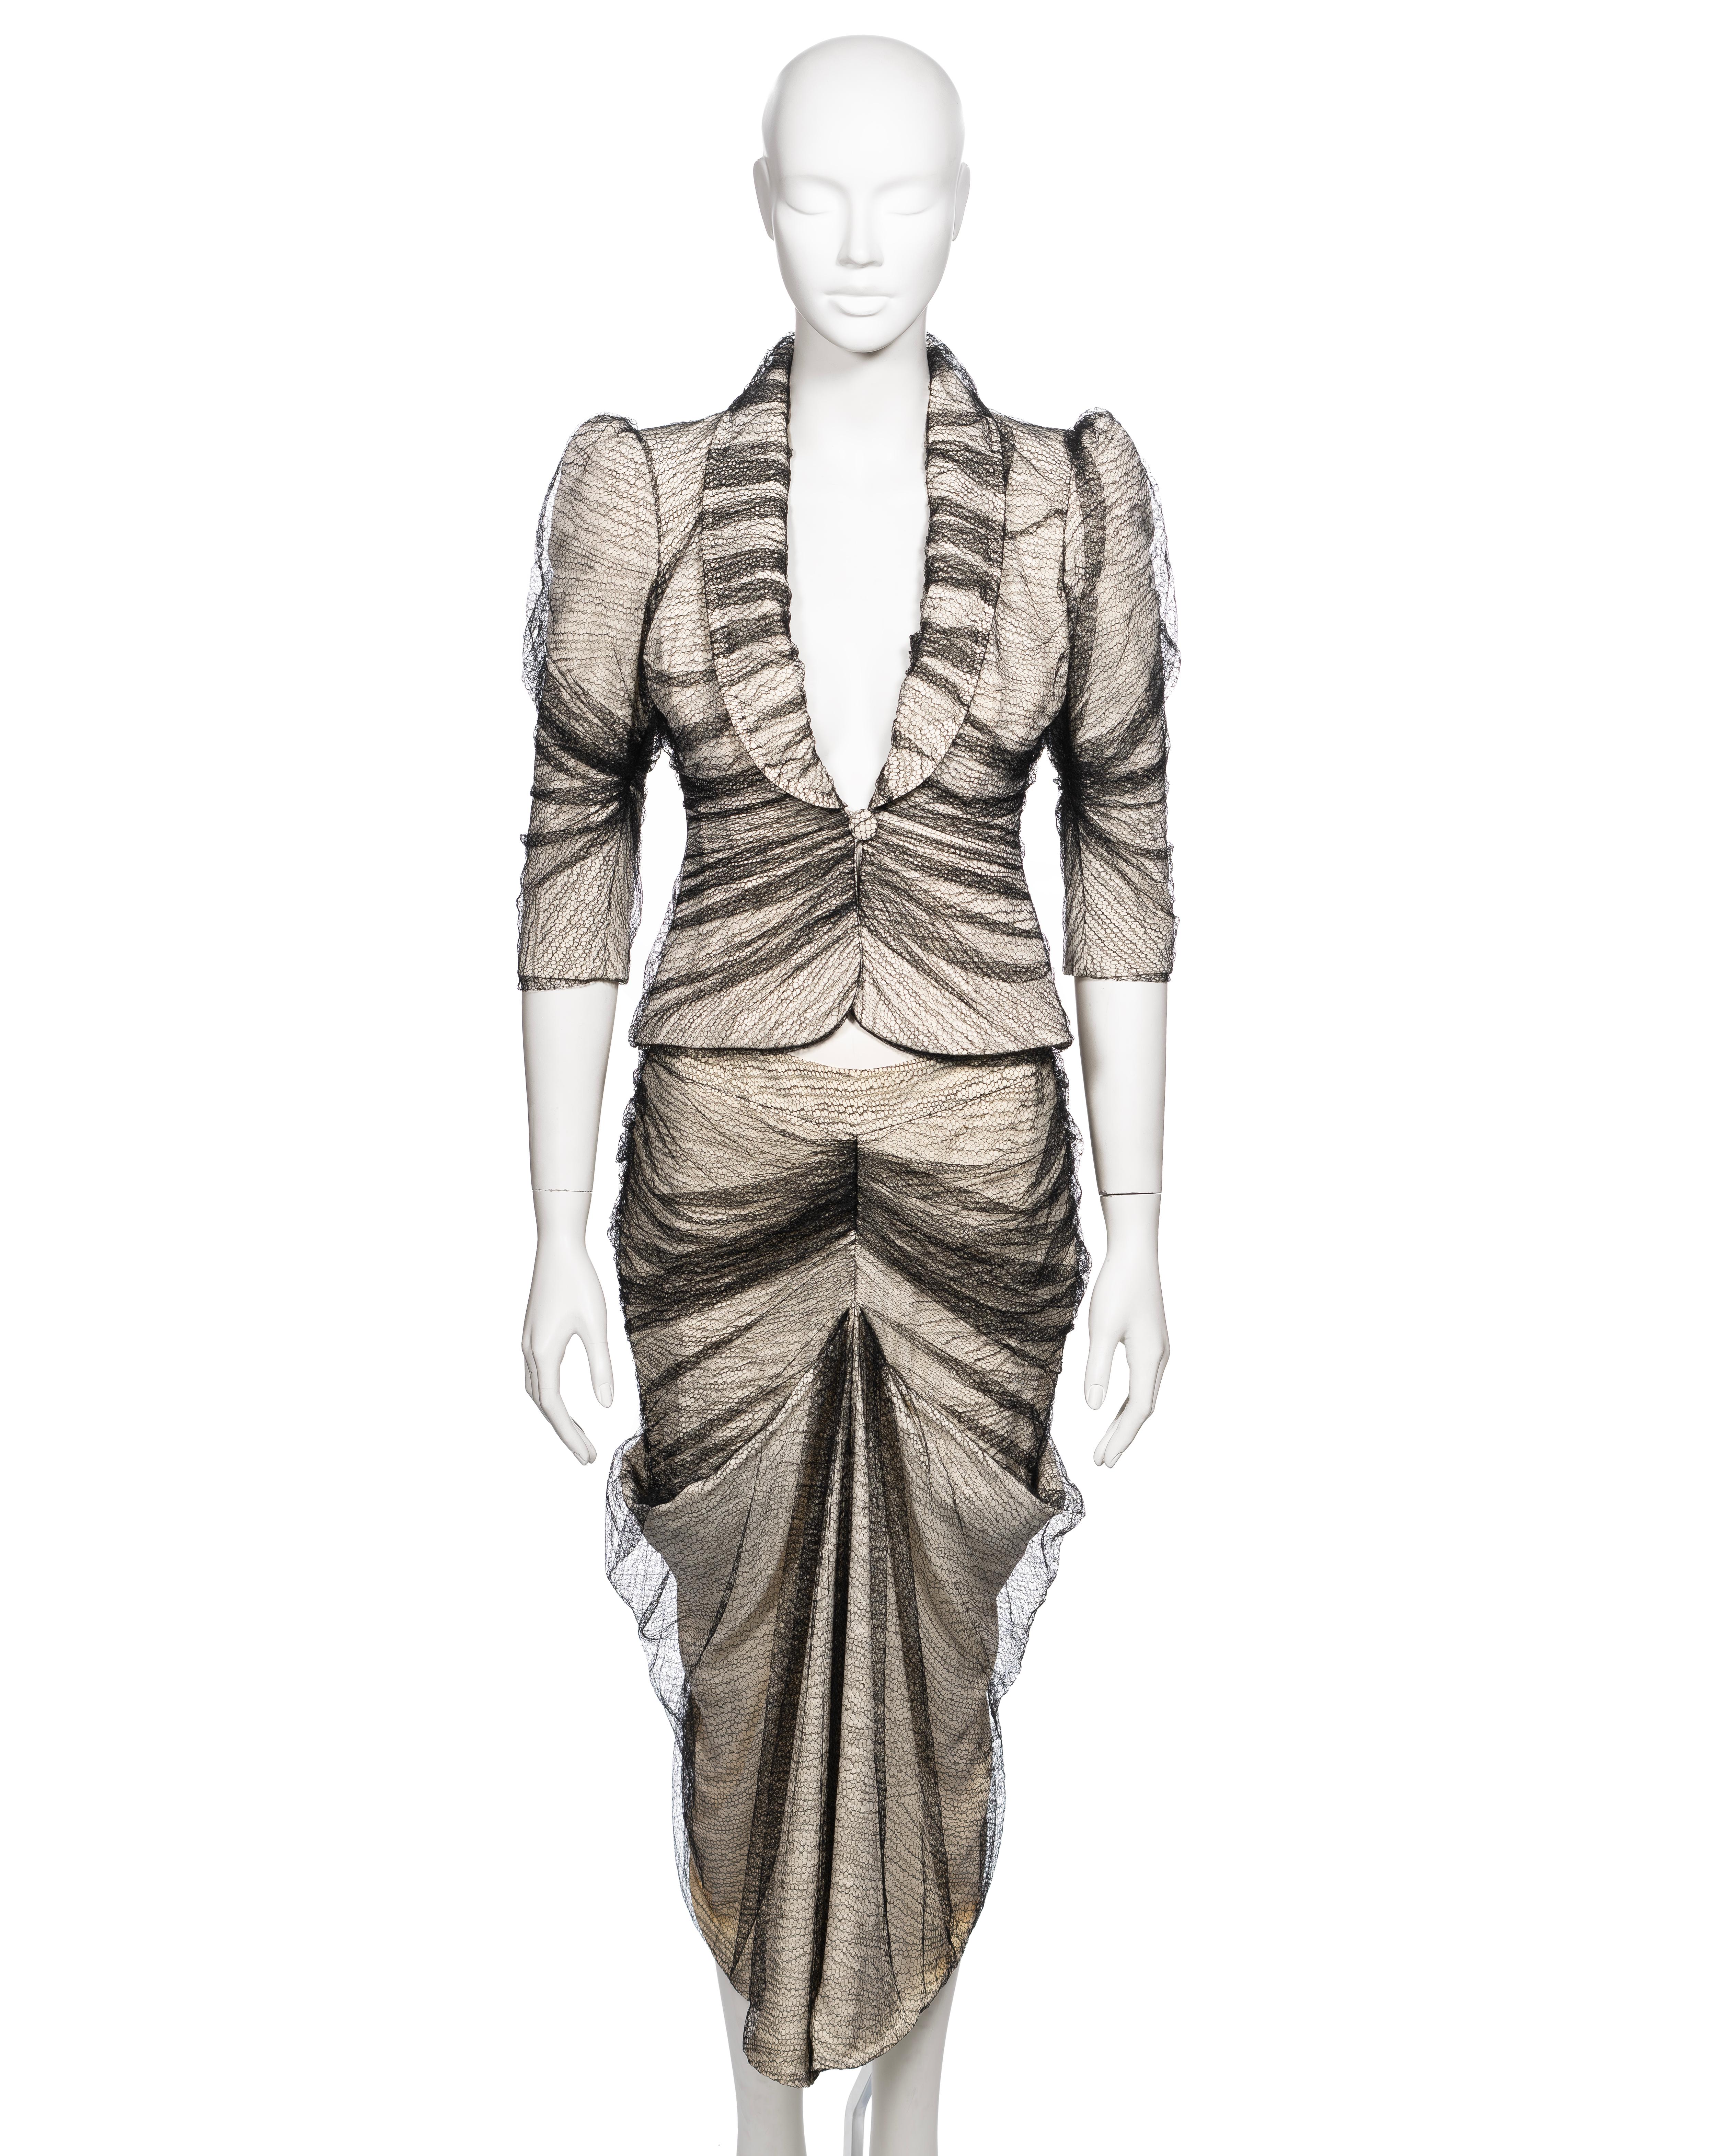 Alexander McQueen 'Sarabande' Ivory Skirt Suit with Black Lace Overlay, SS 2007 In Excellent Condition For Sale In London, GB